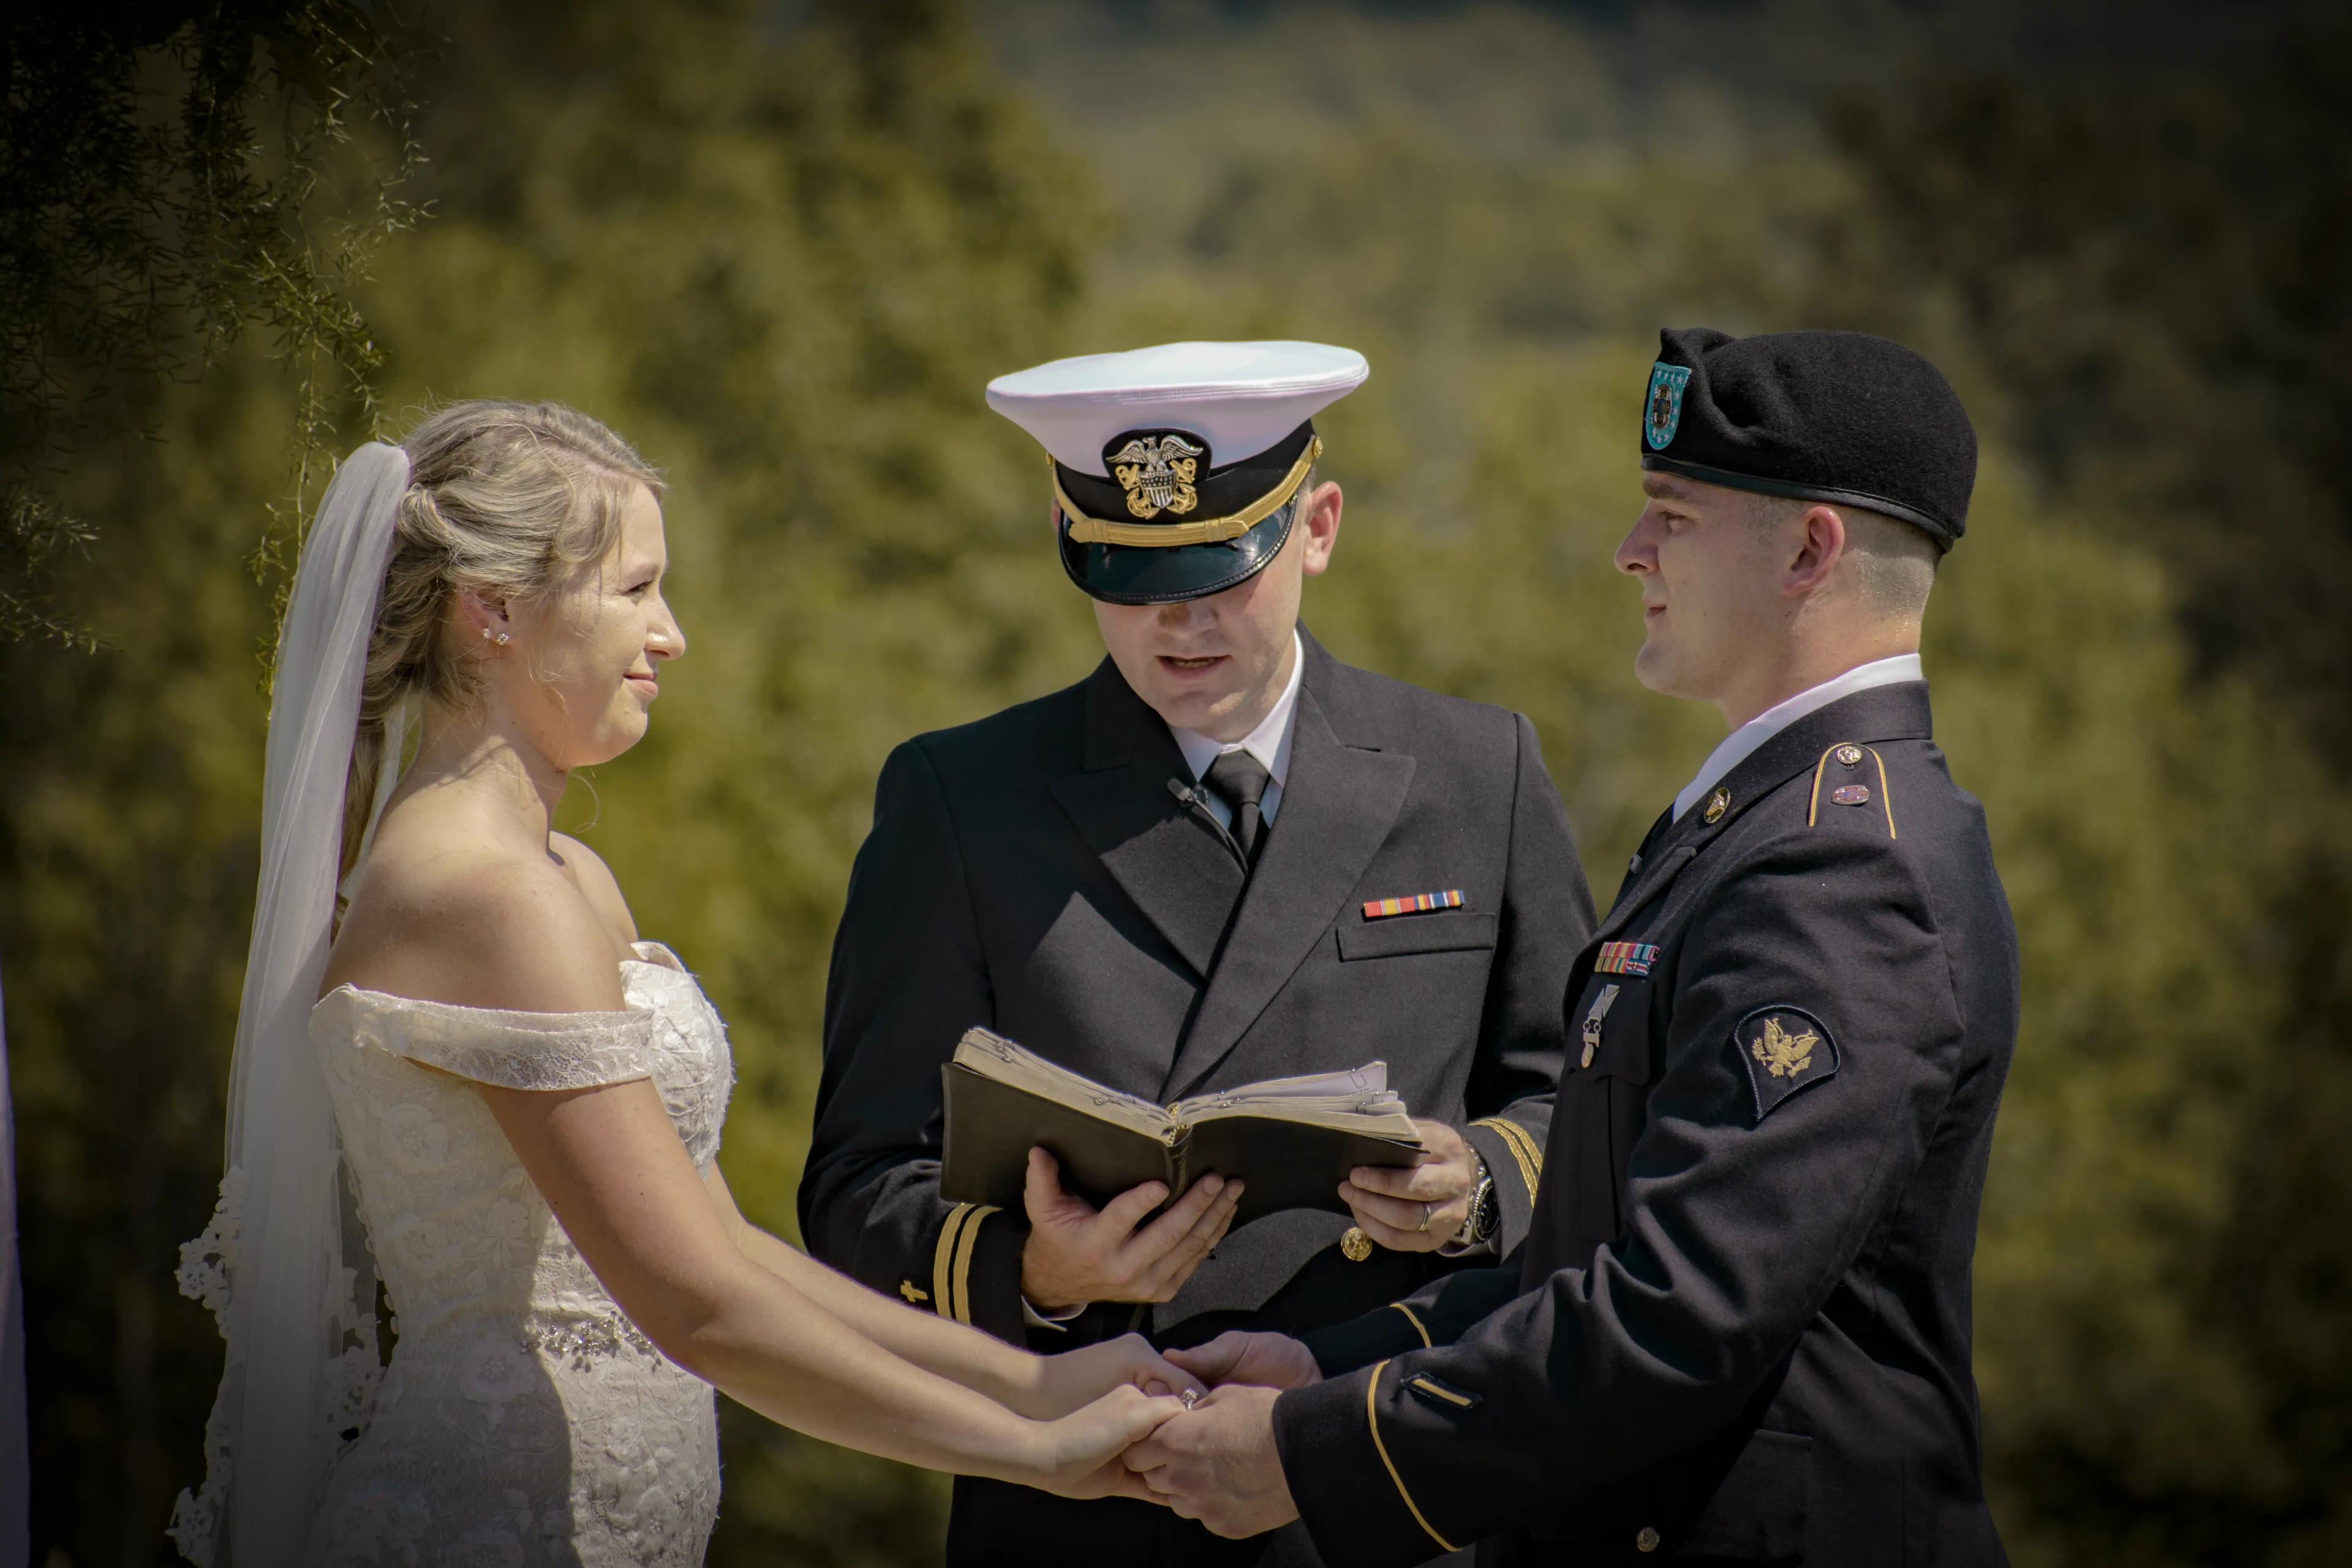 C + L holding hands during their wedding ceremony as the officiant reads out their vows.